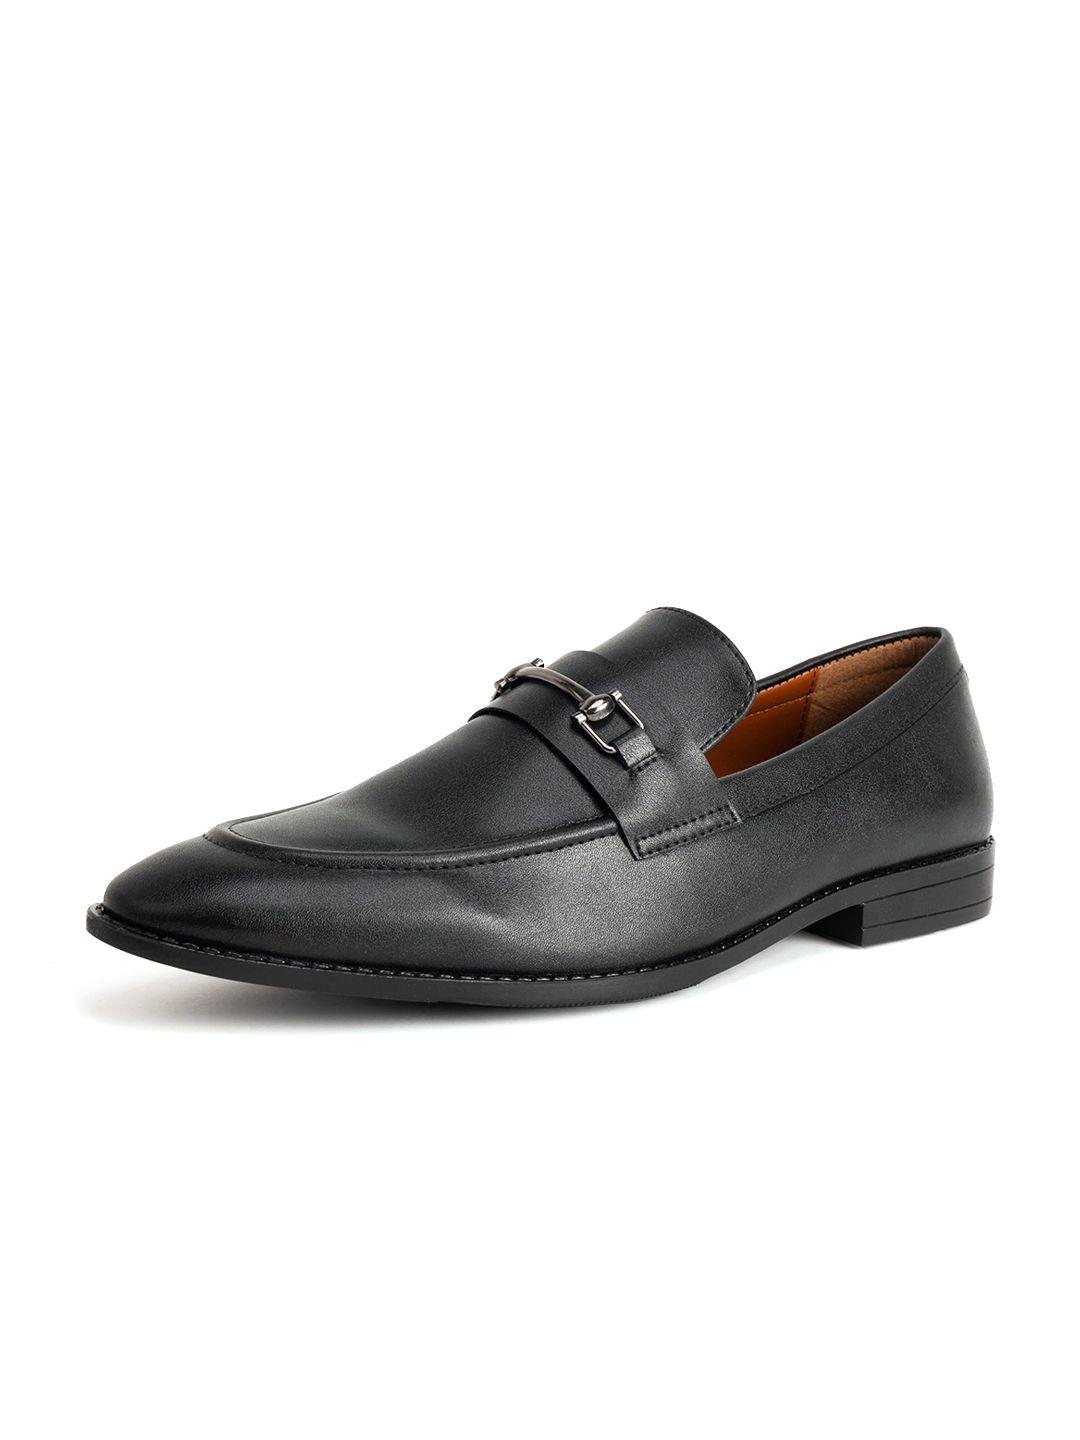 louis stitch men textured leather formal loafers